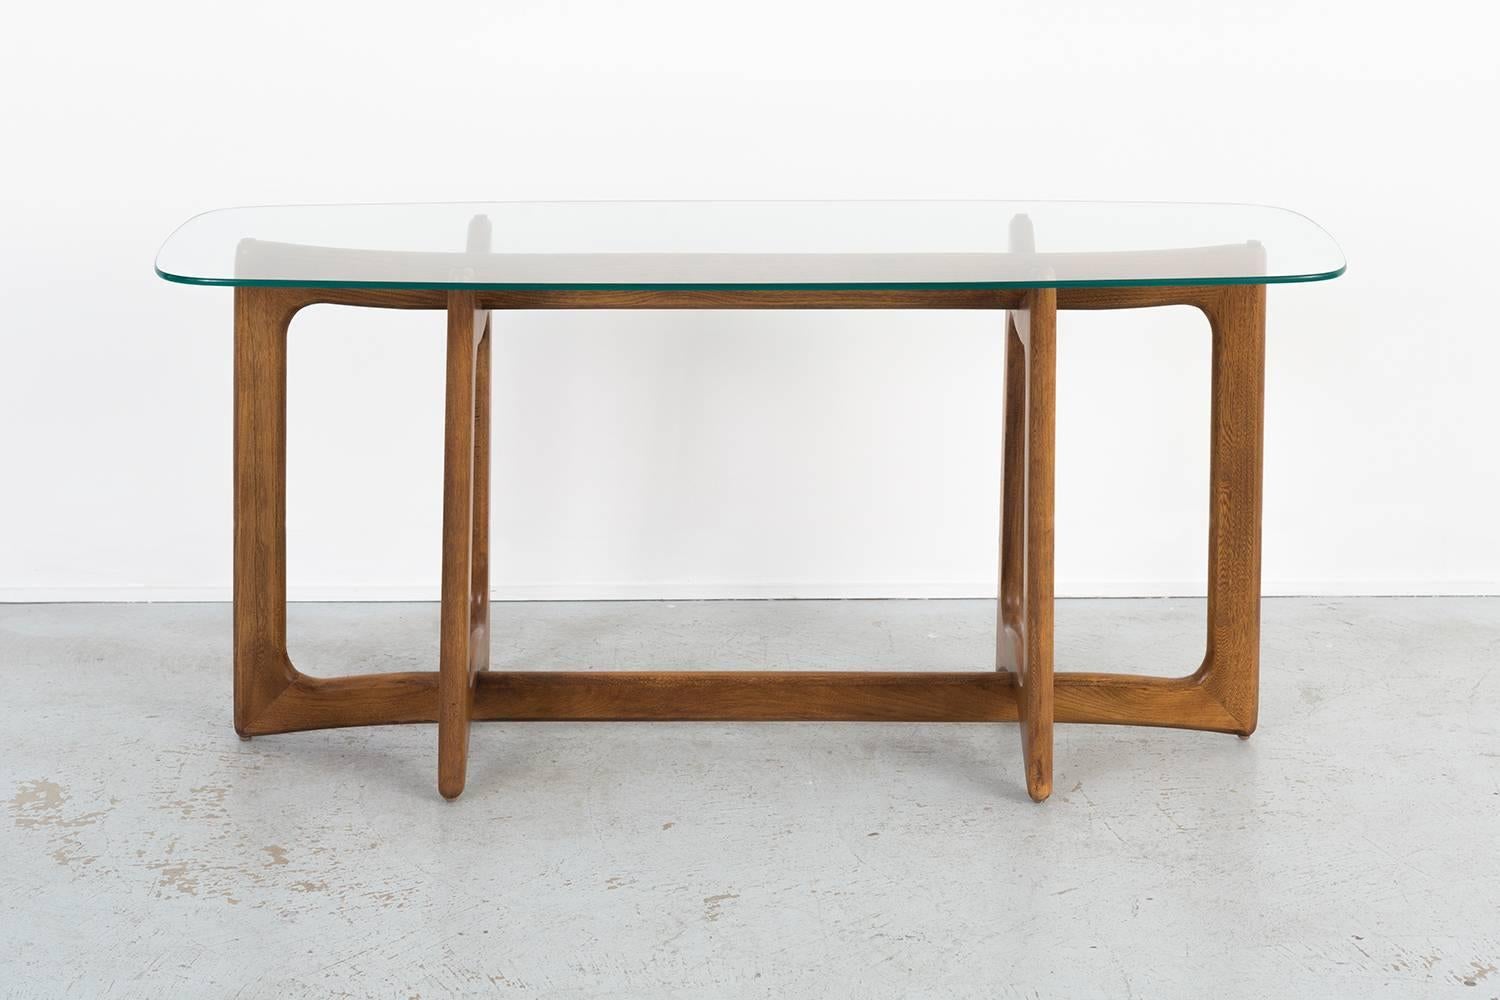 Console or sofa table

designed by Adrian Pearsall for Craft Associates

USA, circa 1960s

Walnut and glass

Measures: 26 ¼” H x 56 1/16” W x 18 1/16” D.